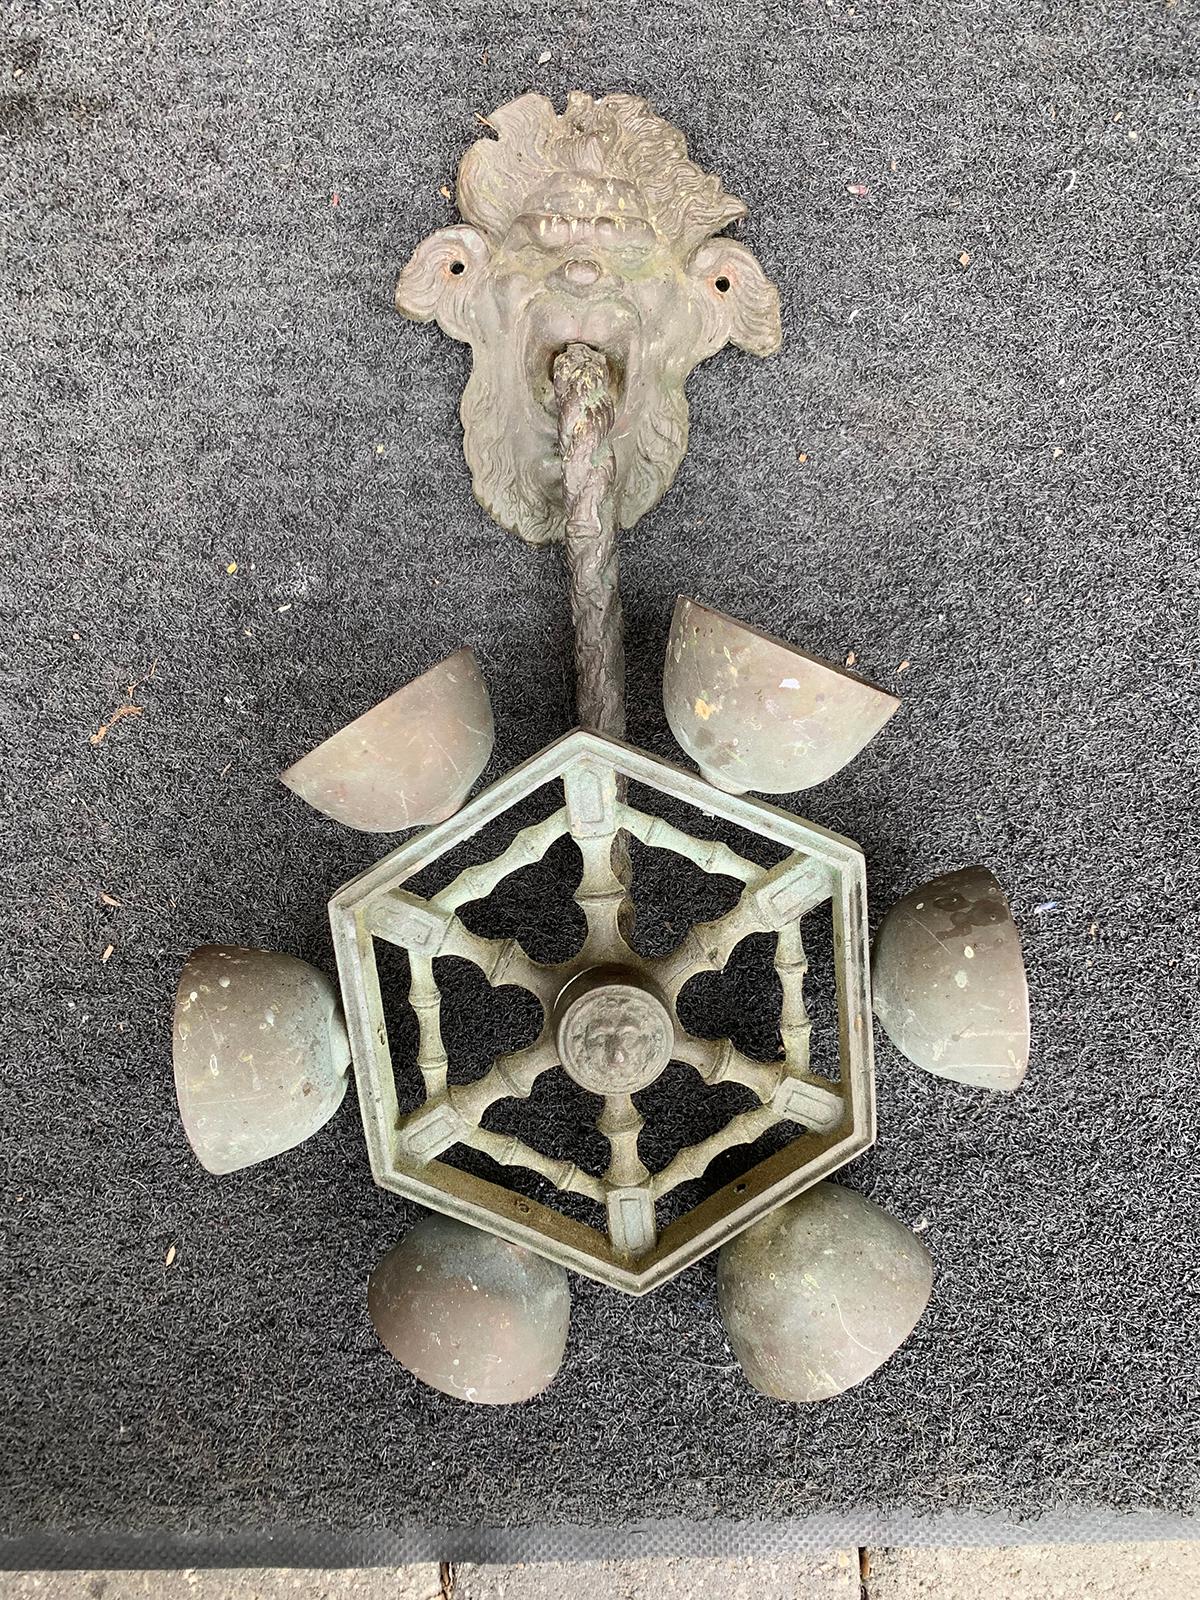 19th century Gothic Revival bronze doorbell with faces.